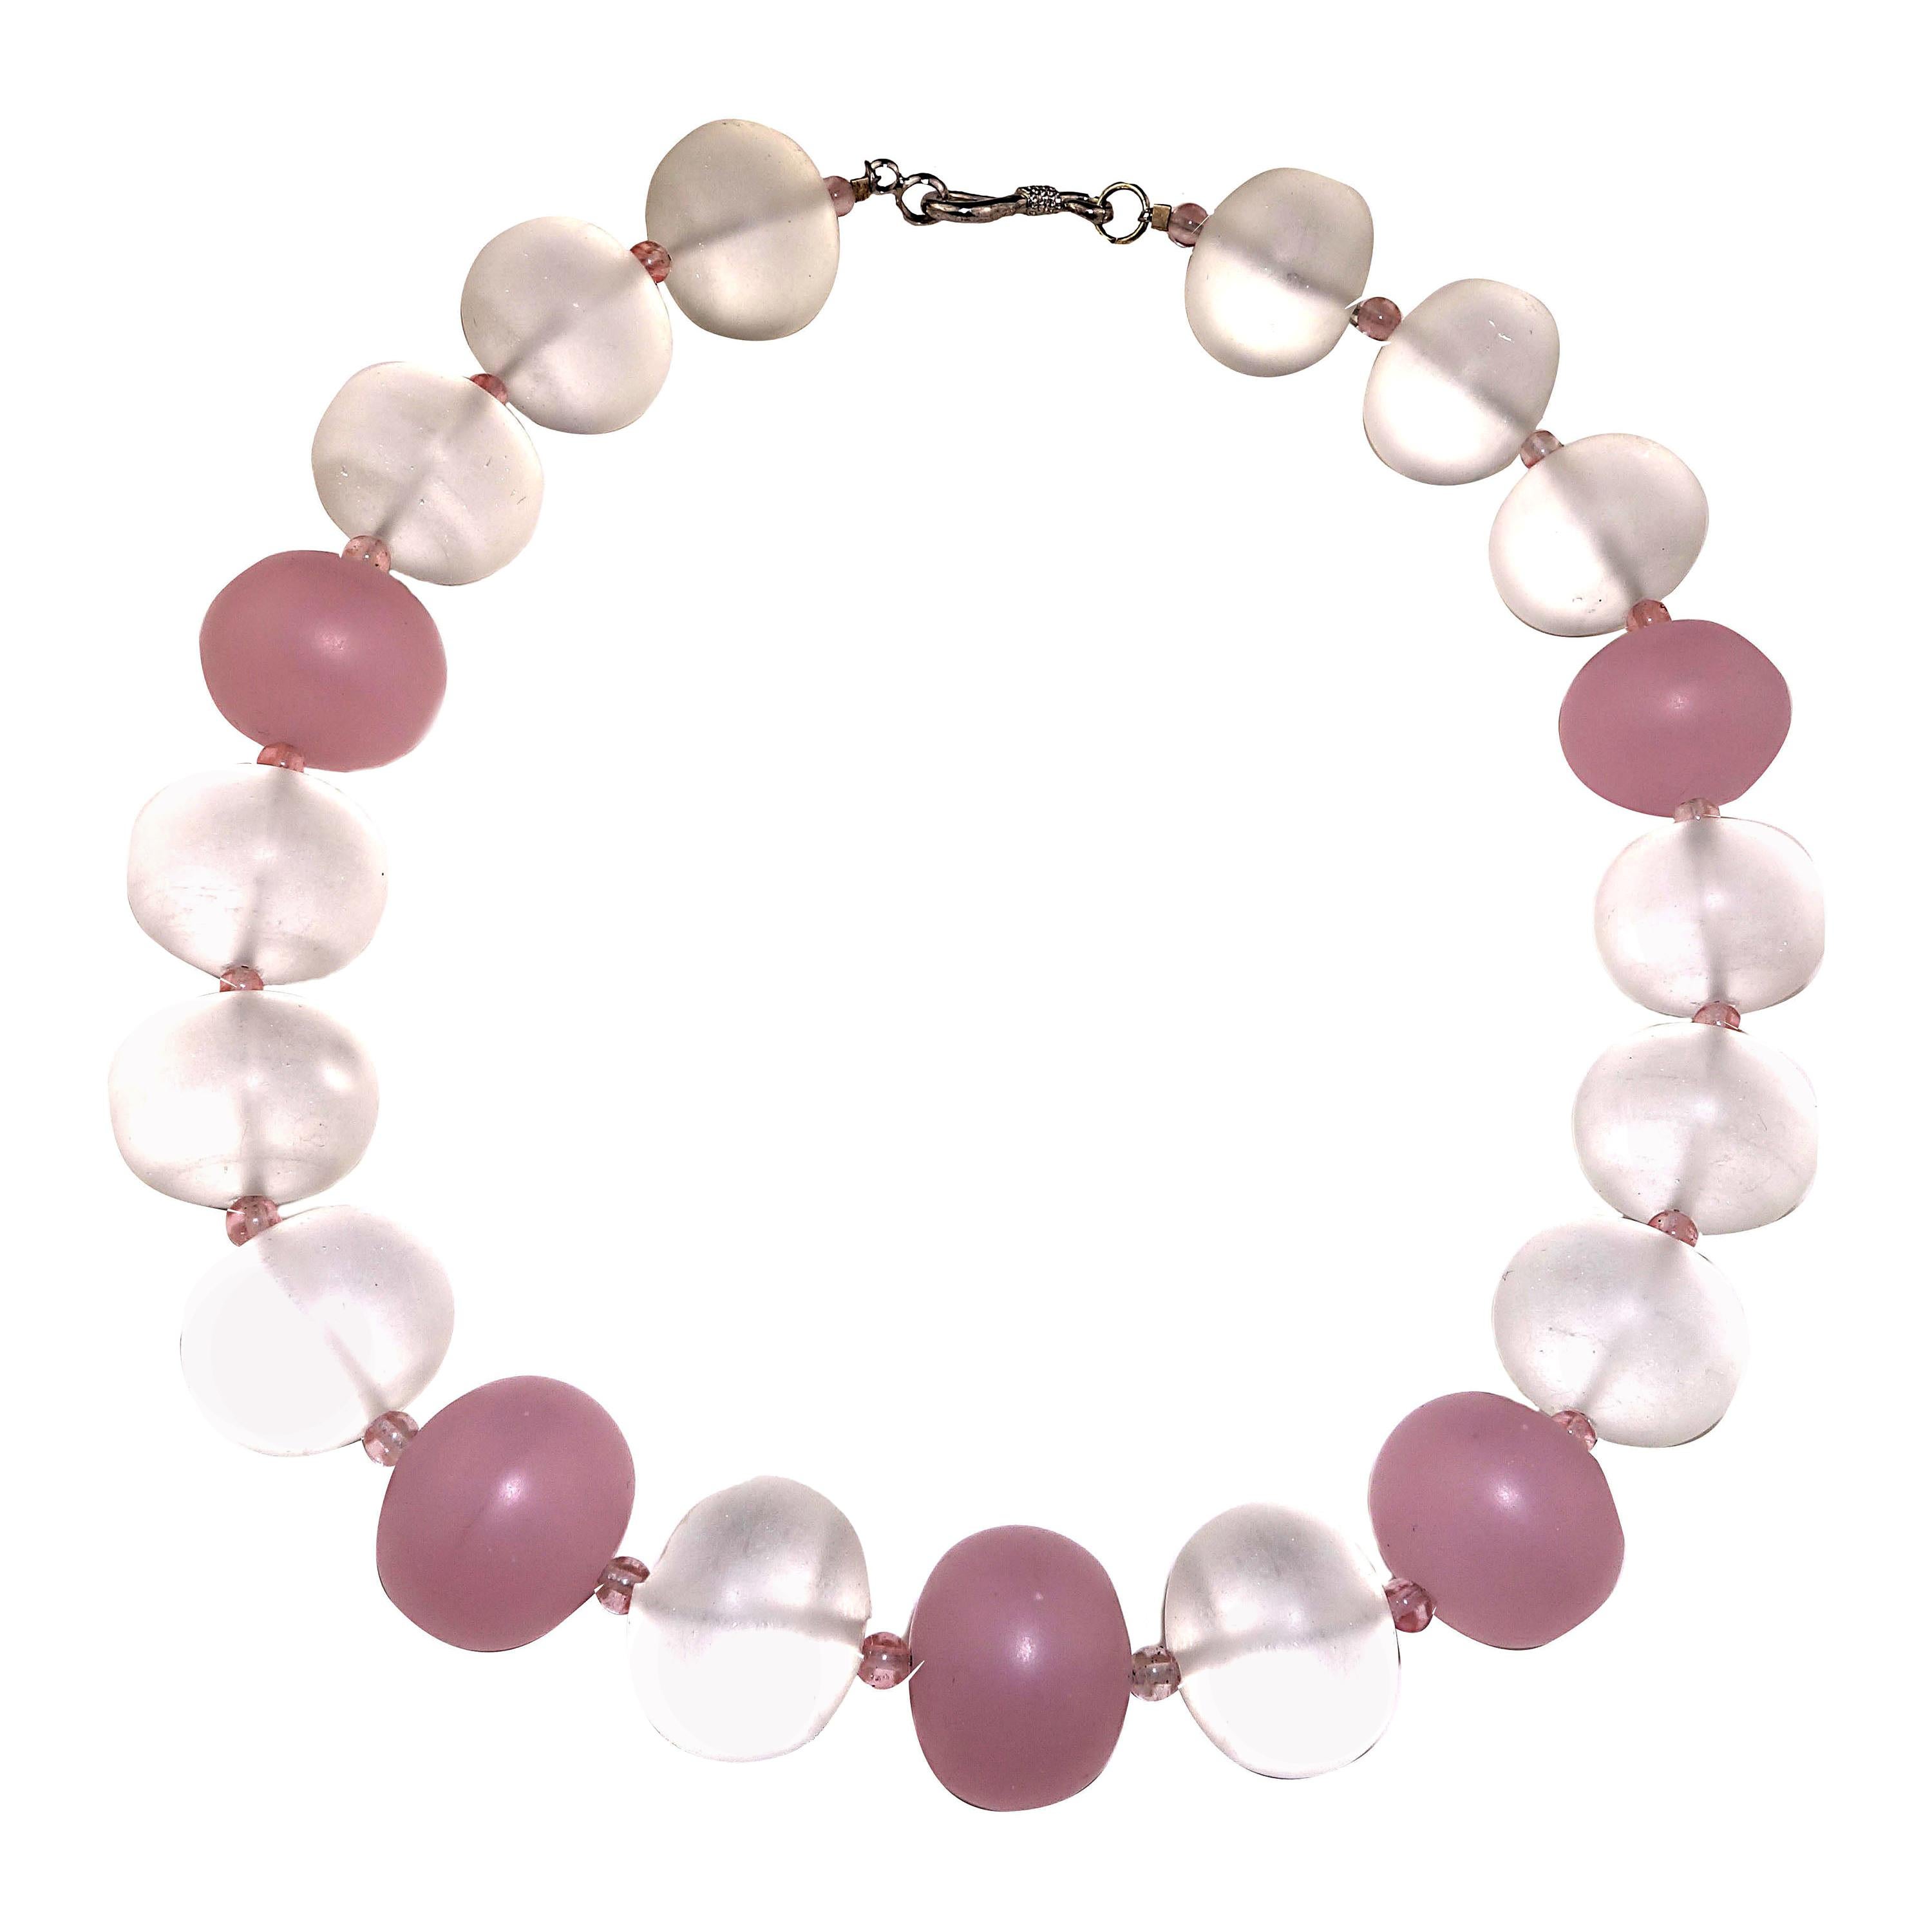 Custom made 18 inch necklace in frosted Rose Quartz and frosted Quartz Crystal Beads of 22MM  accented with rose spacers. Delicate colors in a bold, statement necklace.  Silver plate clasp.  Wear this elegant necklace with all your Summer ensembles.